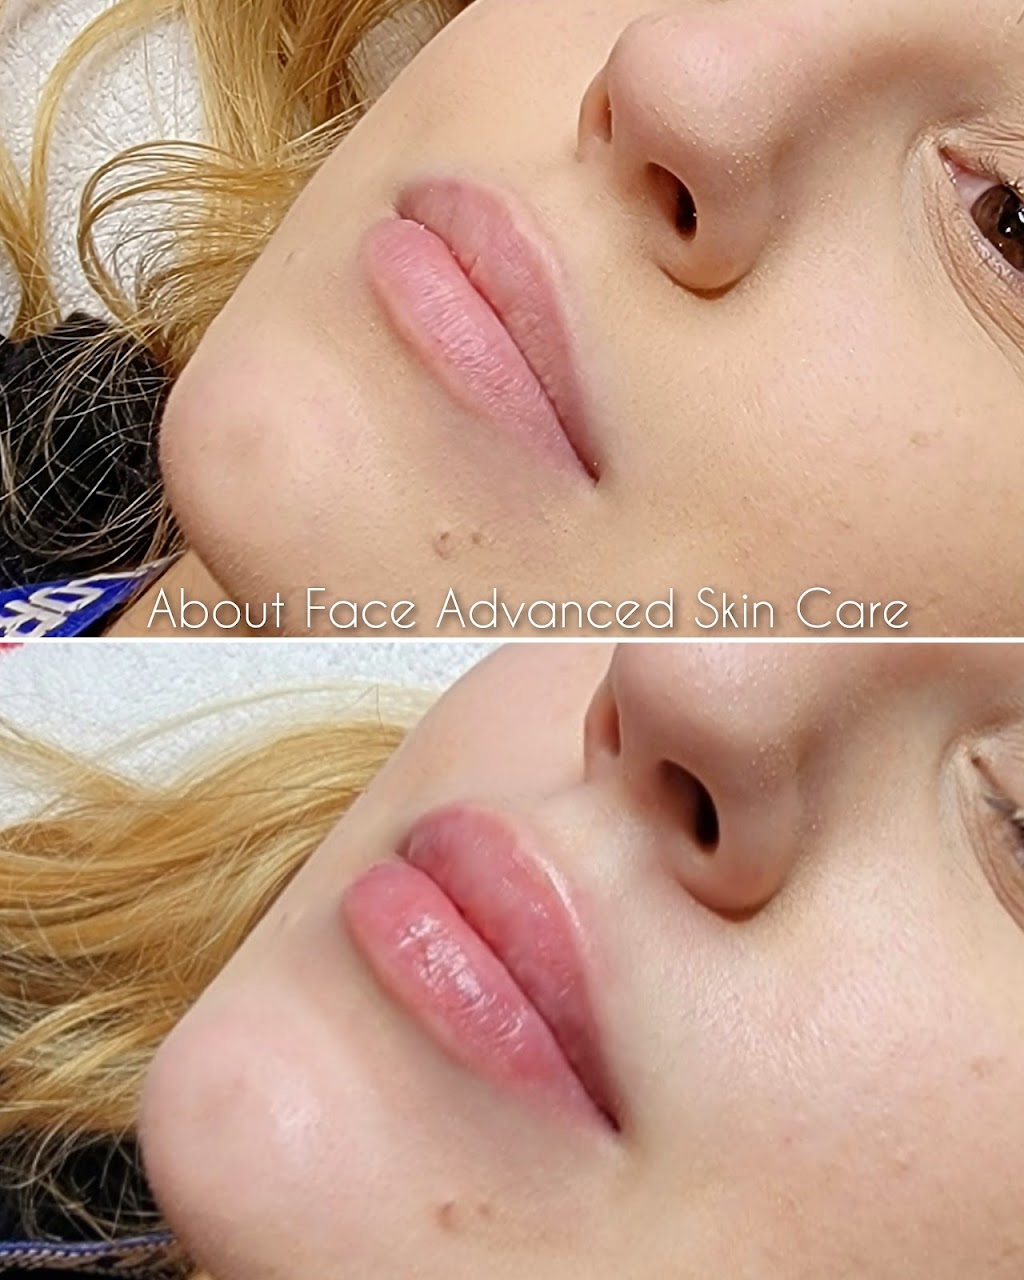 About Face Advanced Skin Care | 13 Tunxis St Unit C, Windsor, CT 06095 | Phone: (860) 878-9010